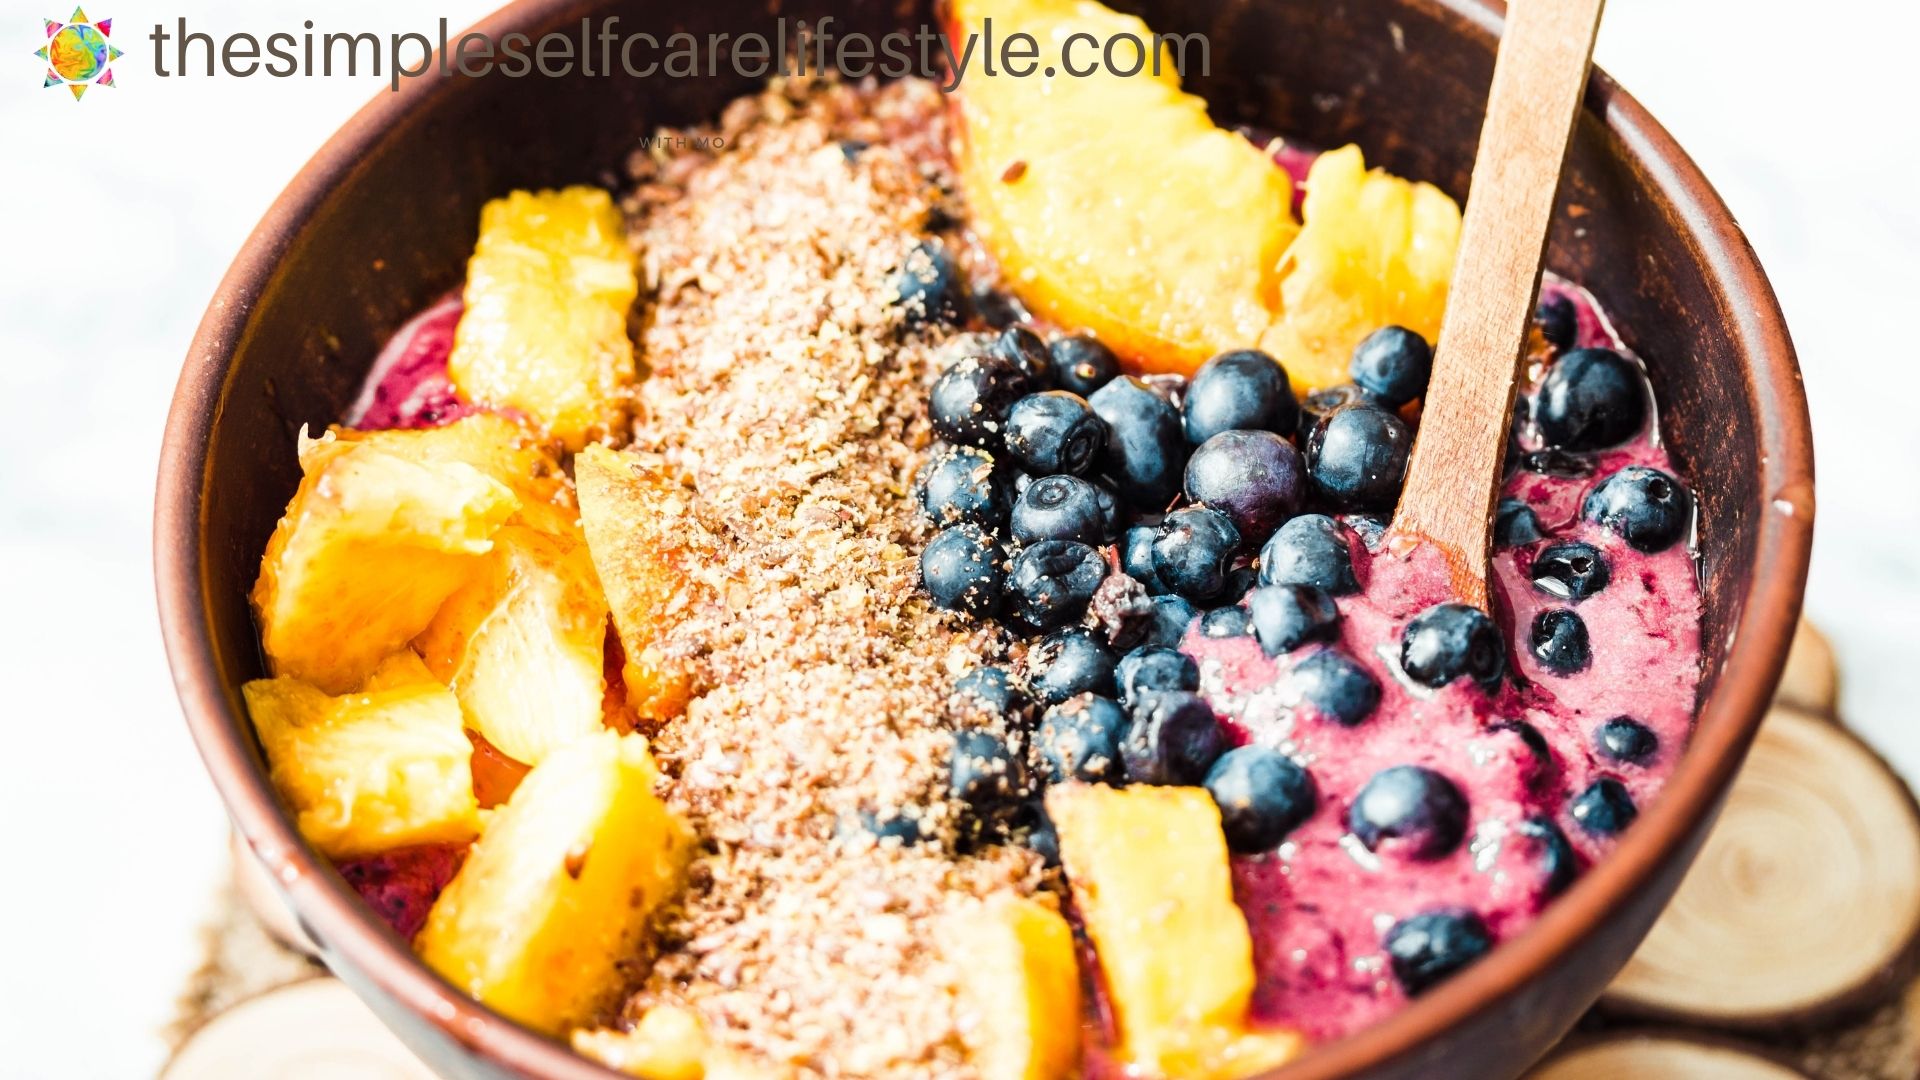 Flax seed is good for sprinkling on a smoothie bowl